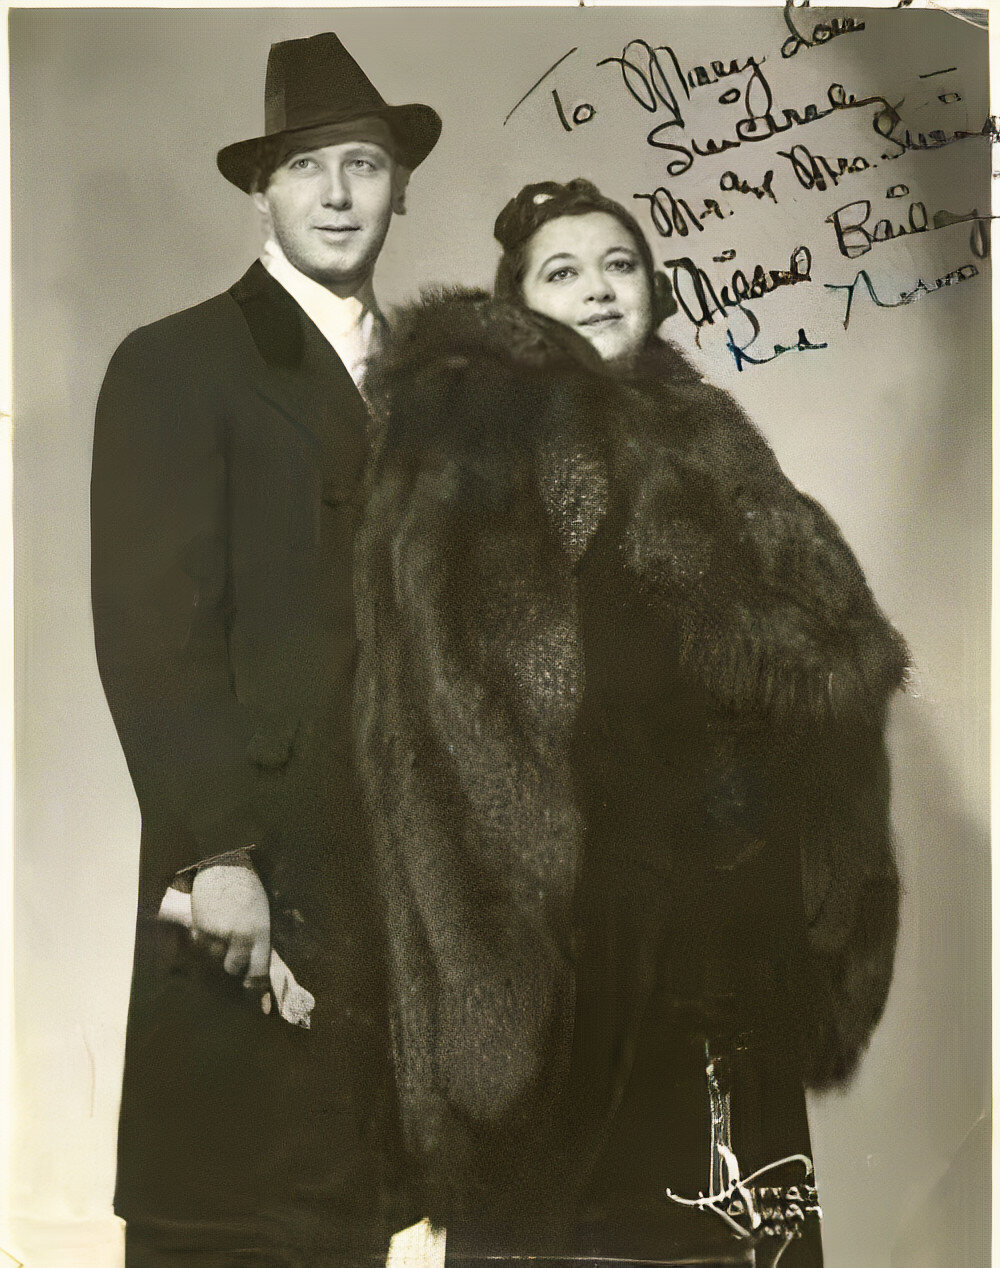 Red Norvo and Mildred Bailey: Mr and Mrs. Swing